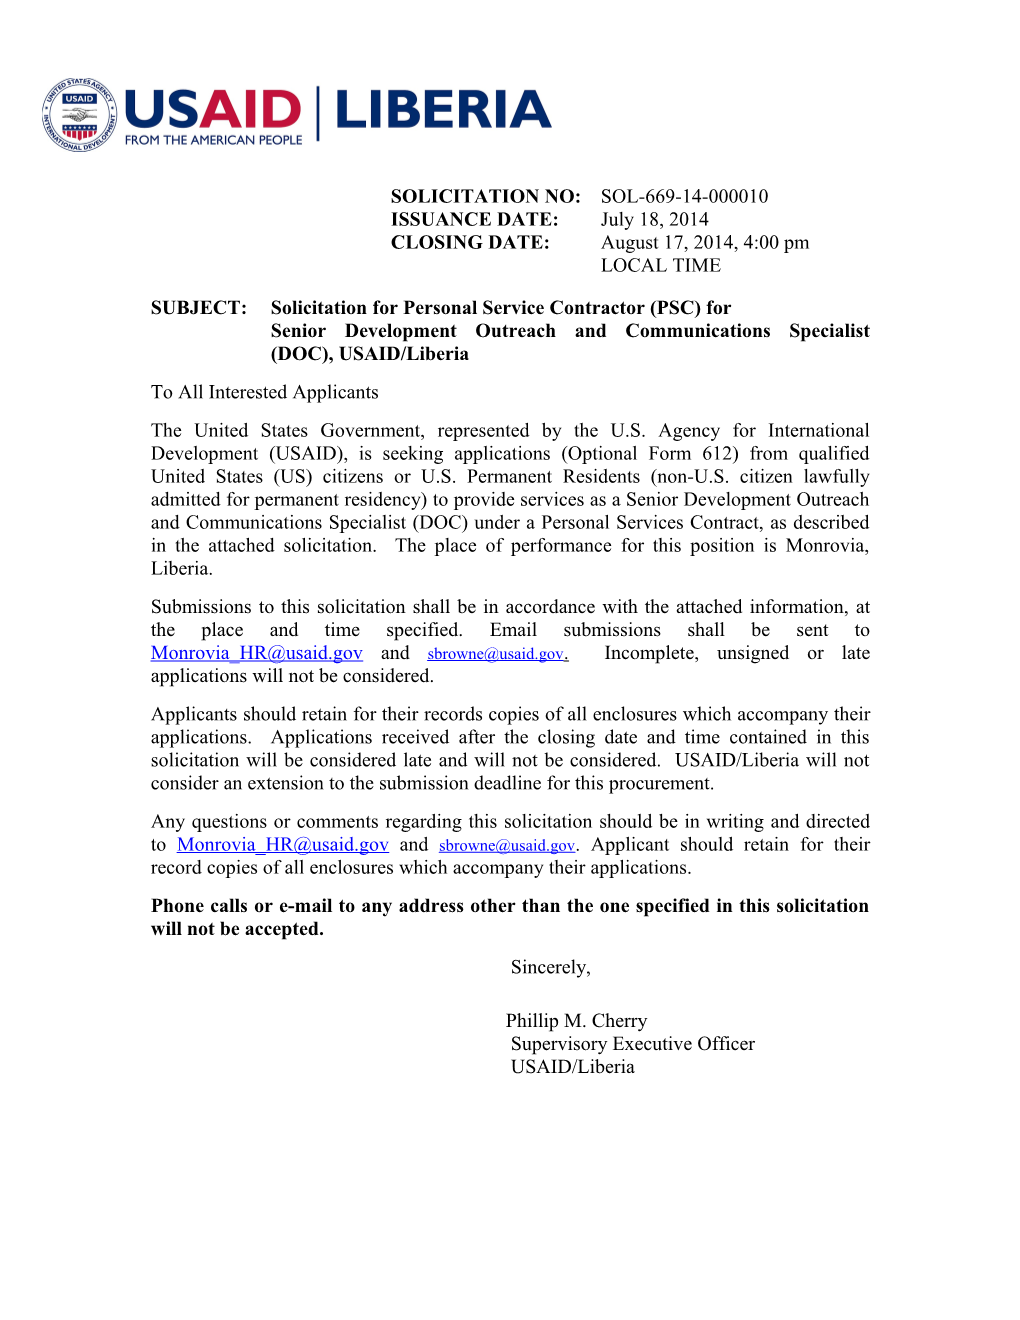 SUBJECT: Solicitation for Personal Service Contractor (PSC) For